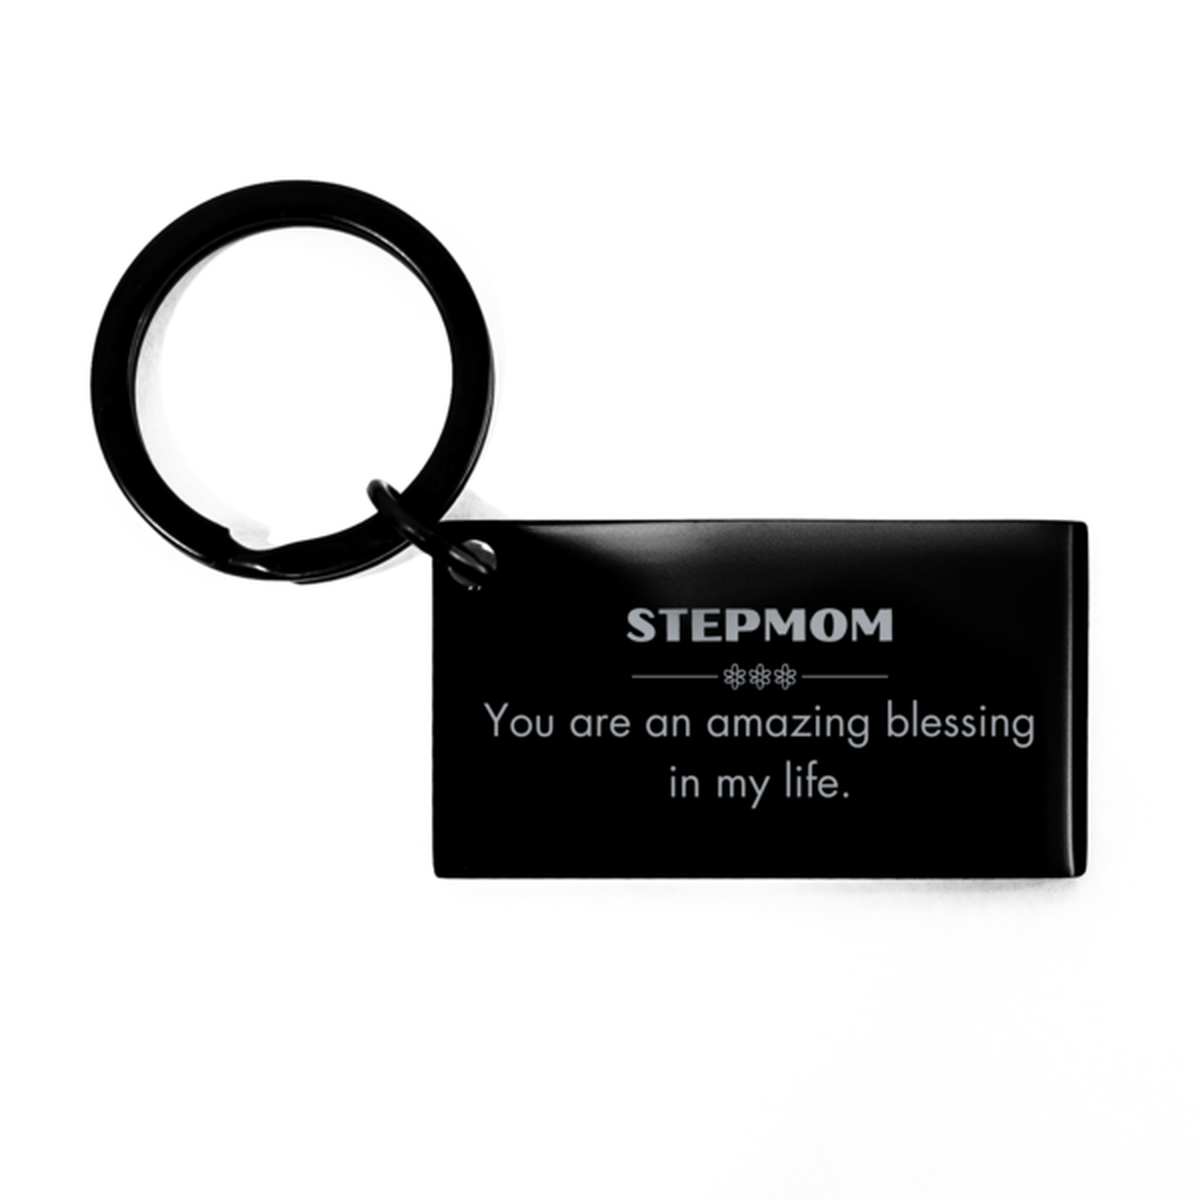 Stepmom Keychain, You are an amazing blessing in my life, Thank You Gifts For Stepmom, Inspirational Birthday Christmas Unique Gifts For Stepmom